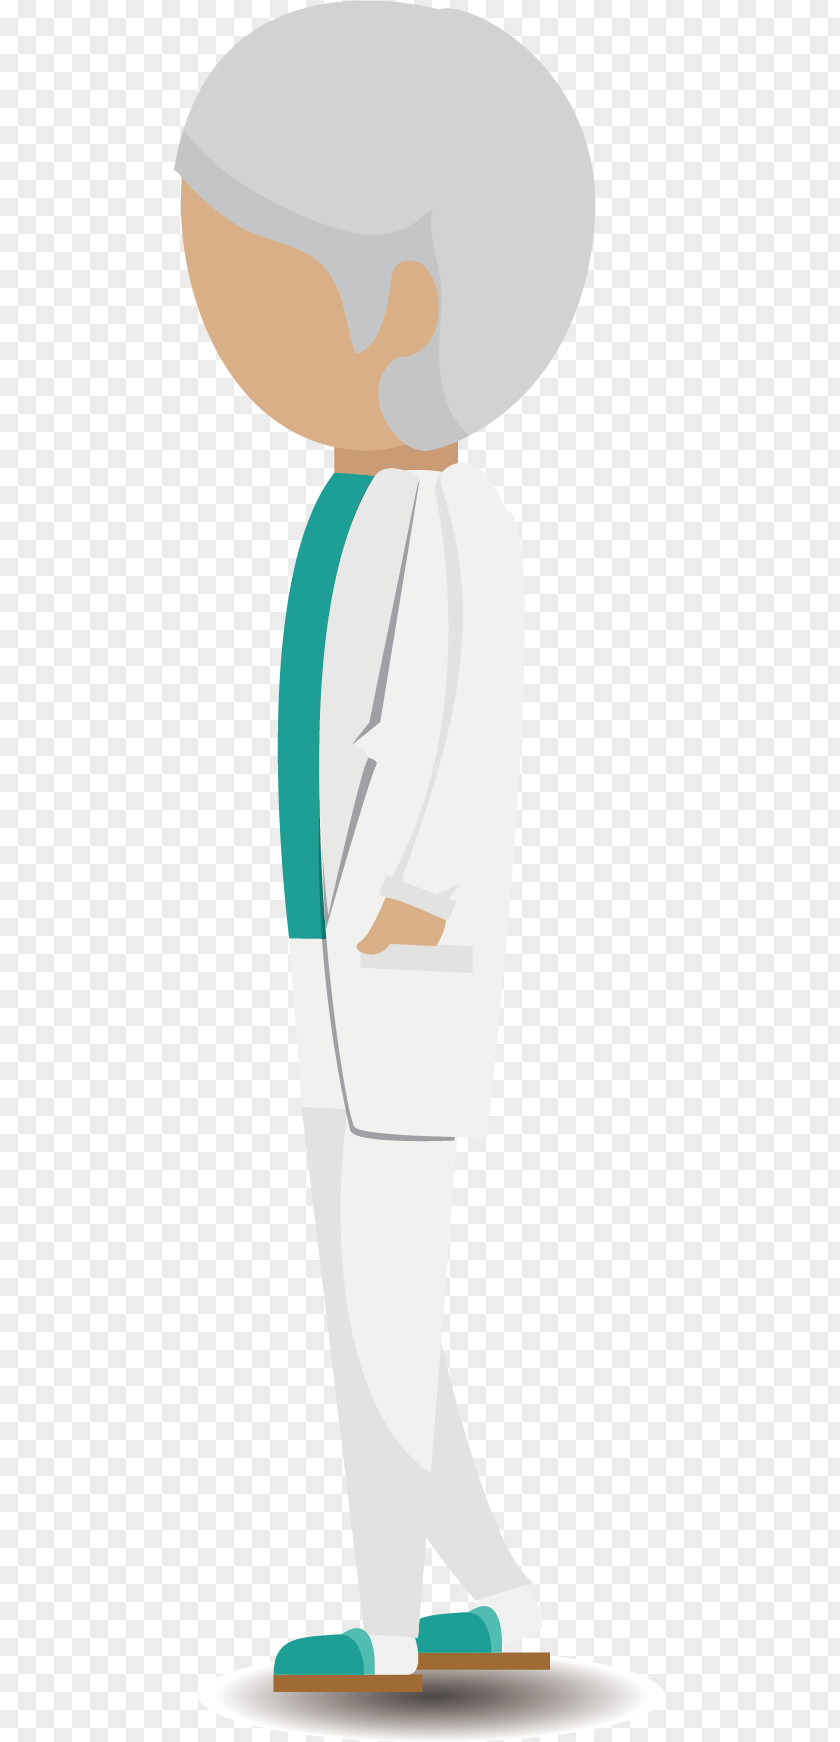 Cartoon Doctor Silhouette Physician Illustration PNG